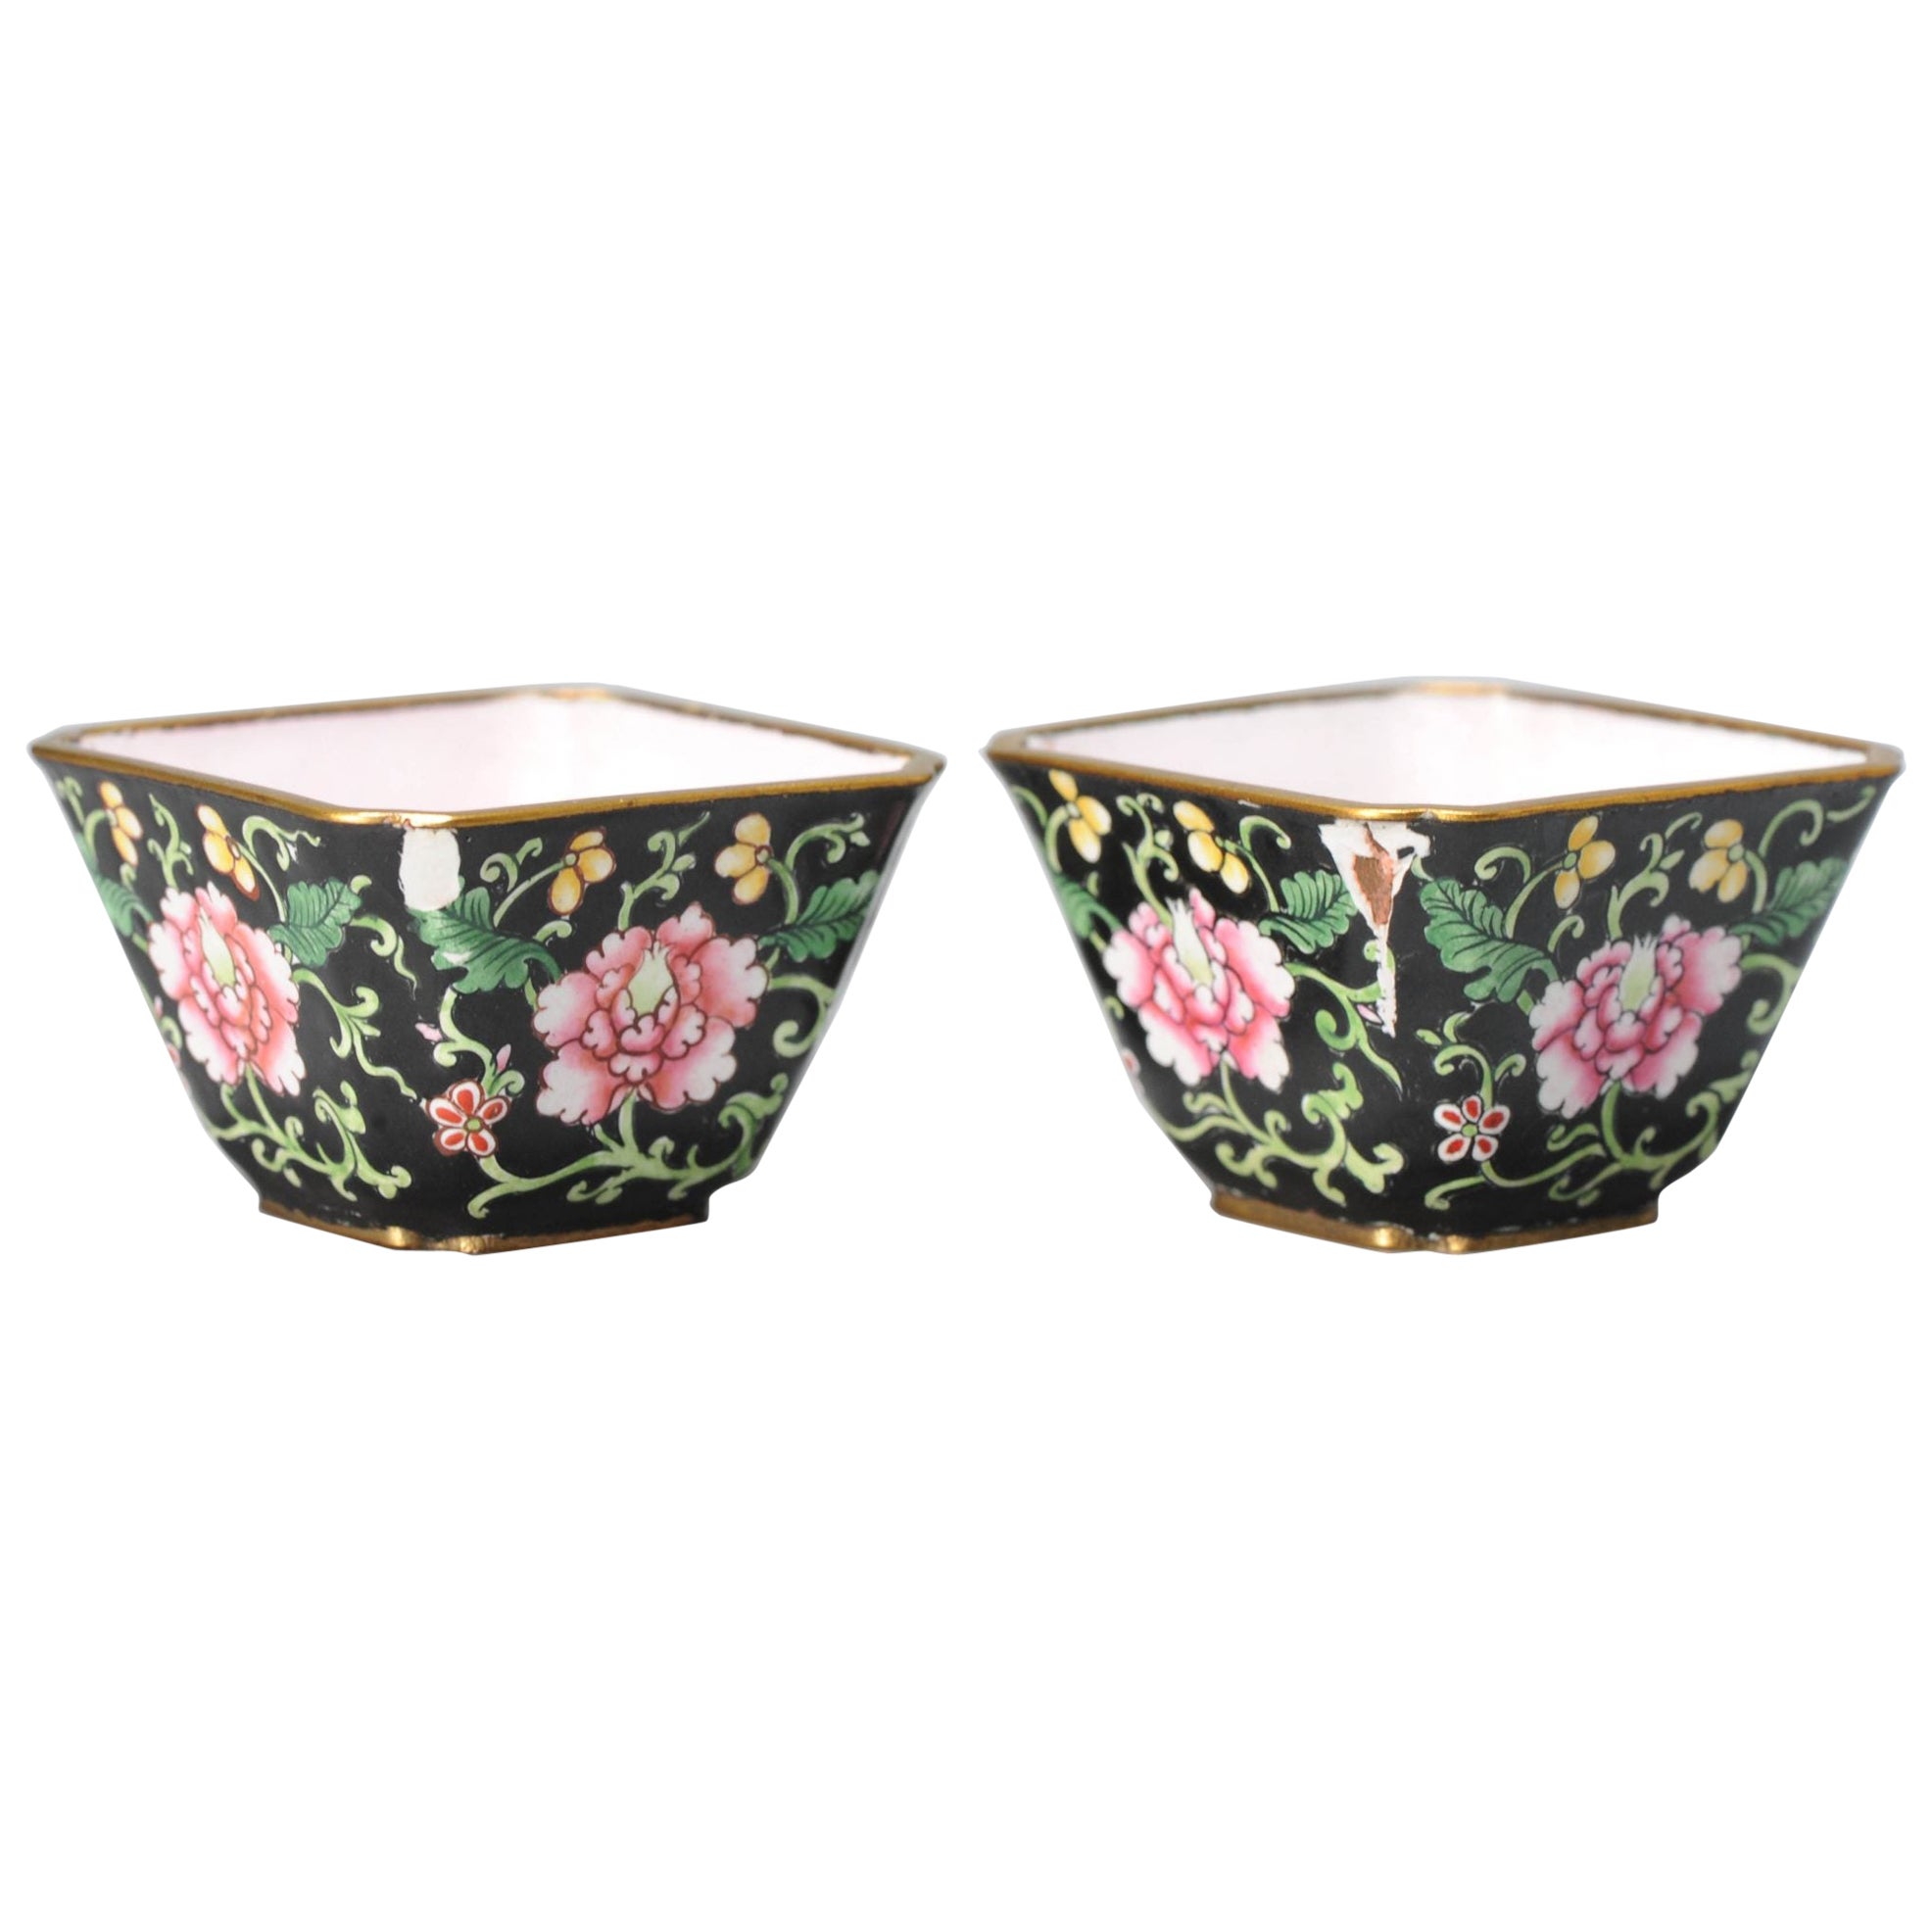 Pair of Antique Chinese Enamel Bronze Cantonese Tea Cups, 18/19th Century For Sale